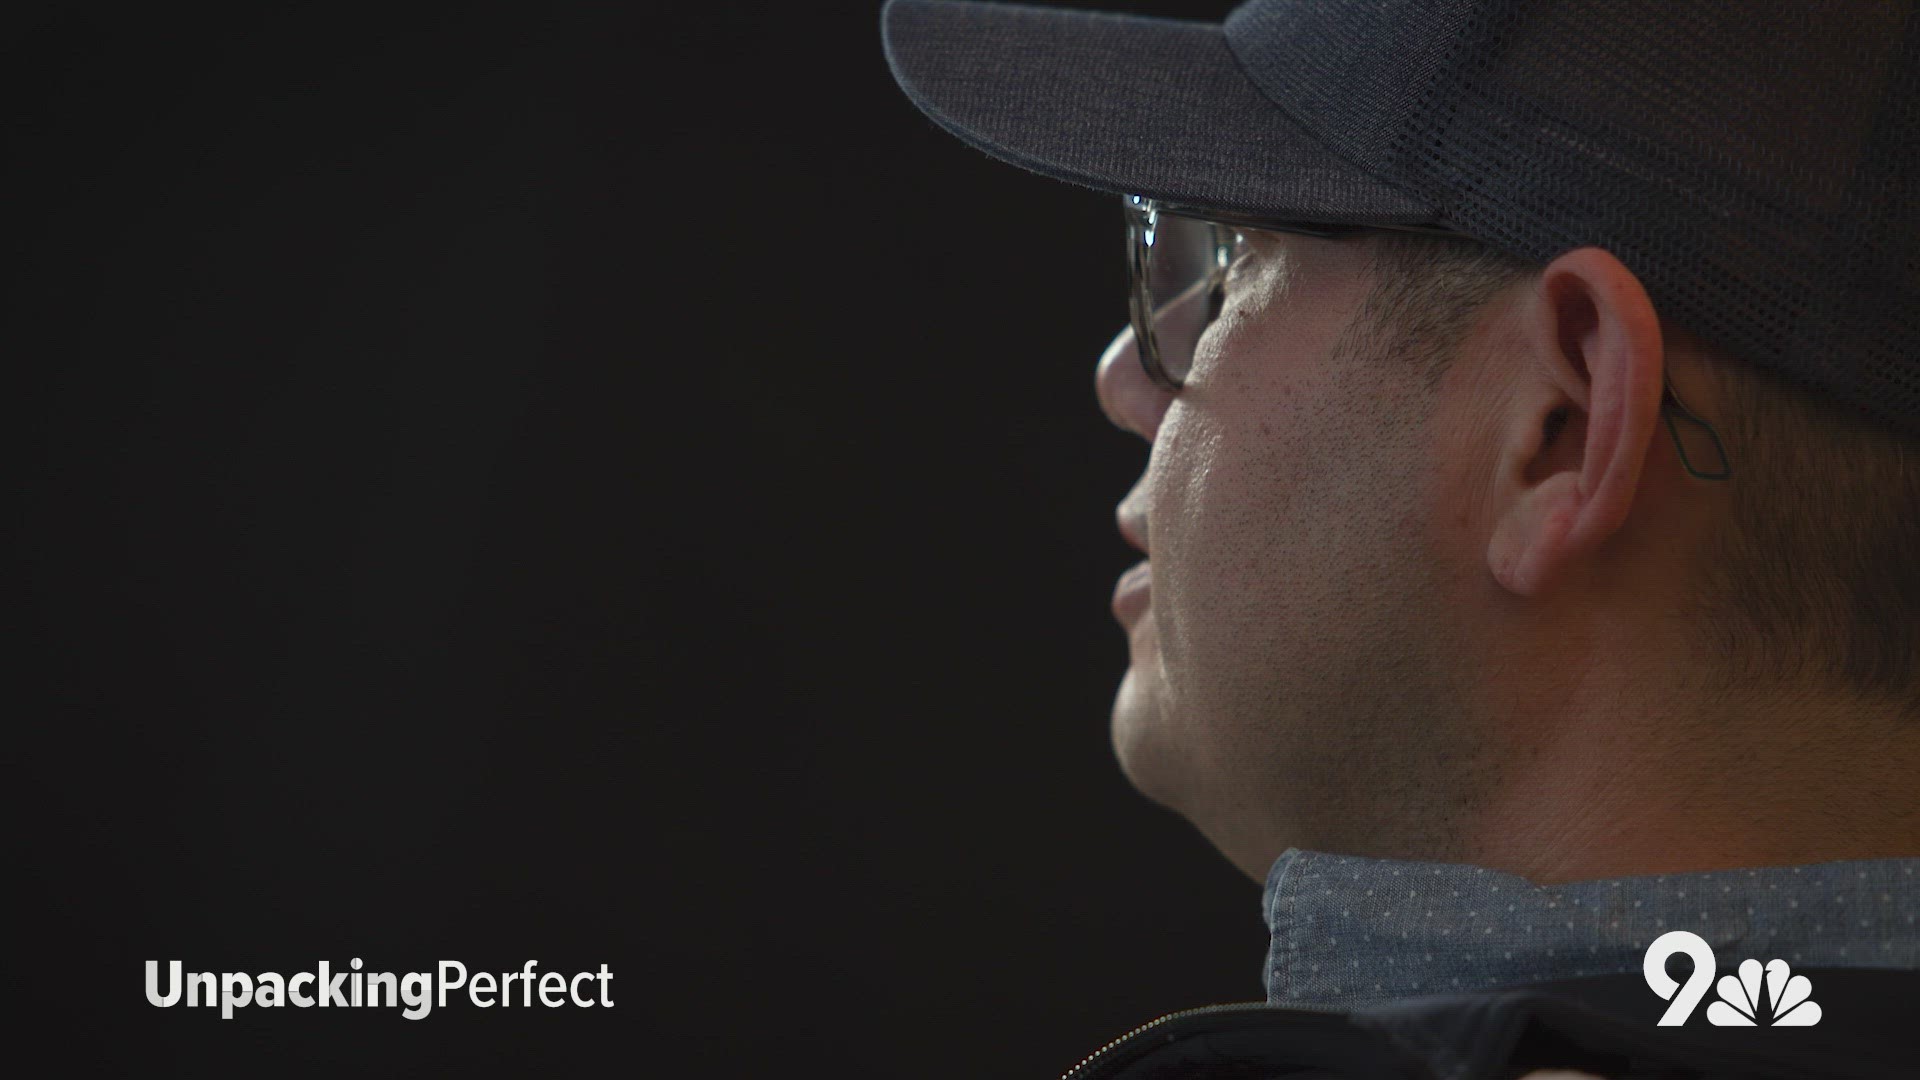 Vic recently sat down with 9NEWS and Unpacking Perfect to share his story of mental wellness, and how he has pushed aside the ideals of perfection.